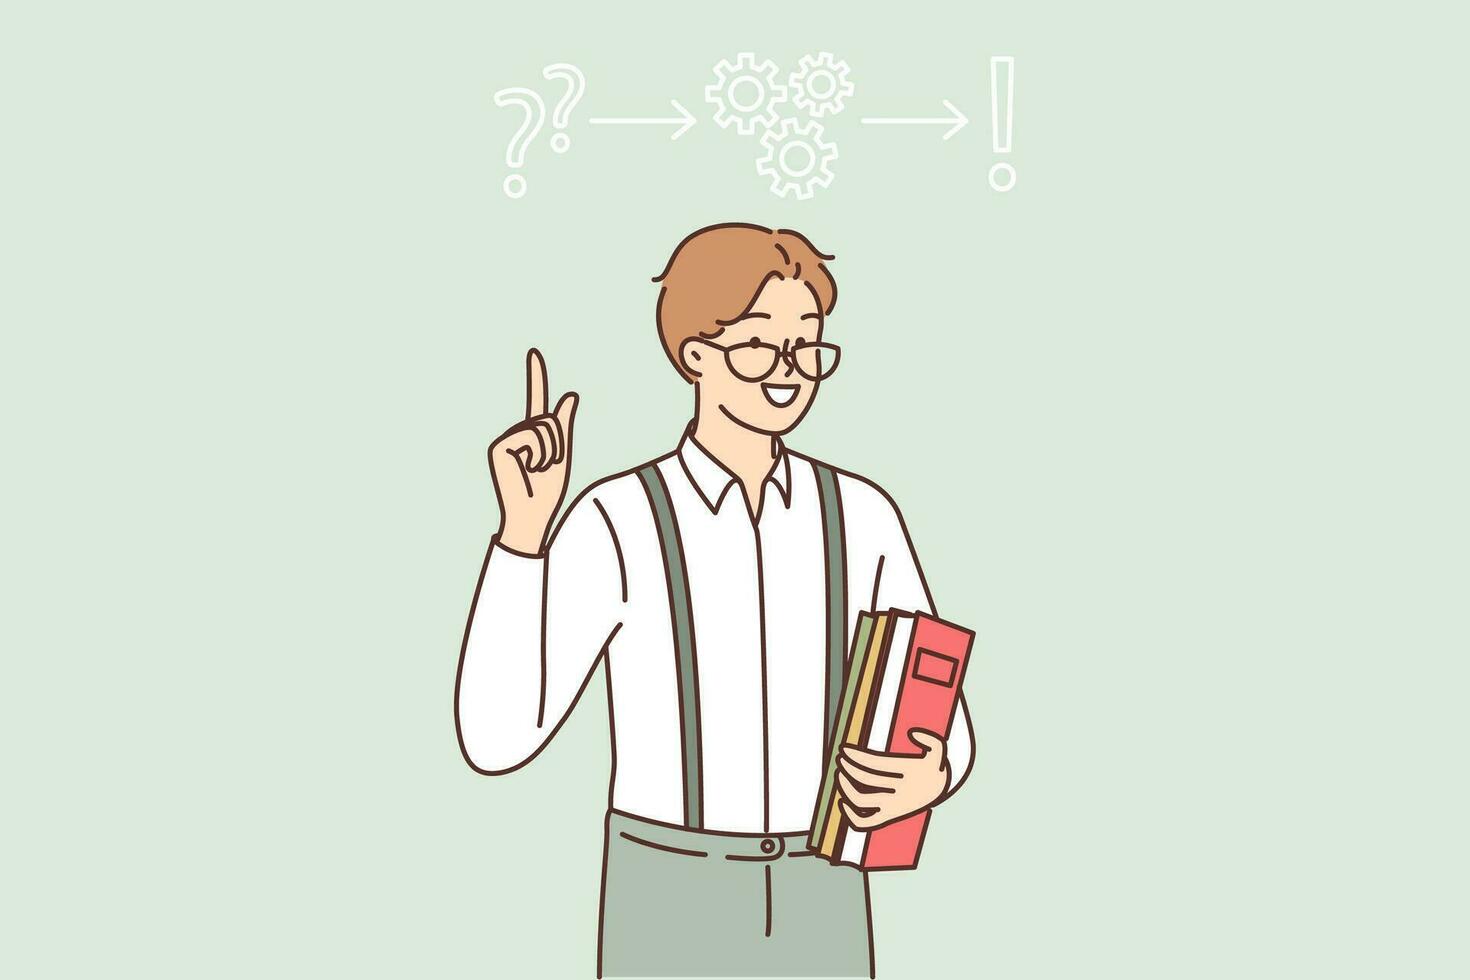 Man inventor invented solution to business problem points finger at gears with question and exclamation marks. Inventor guy with books in hands announces new idea to improve productivity vector